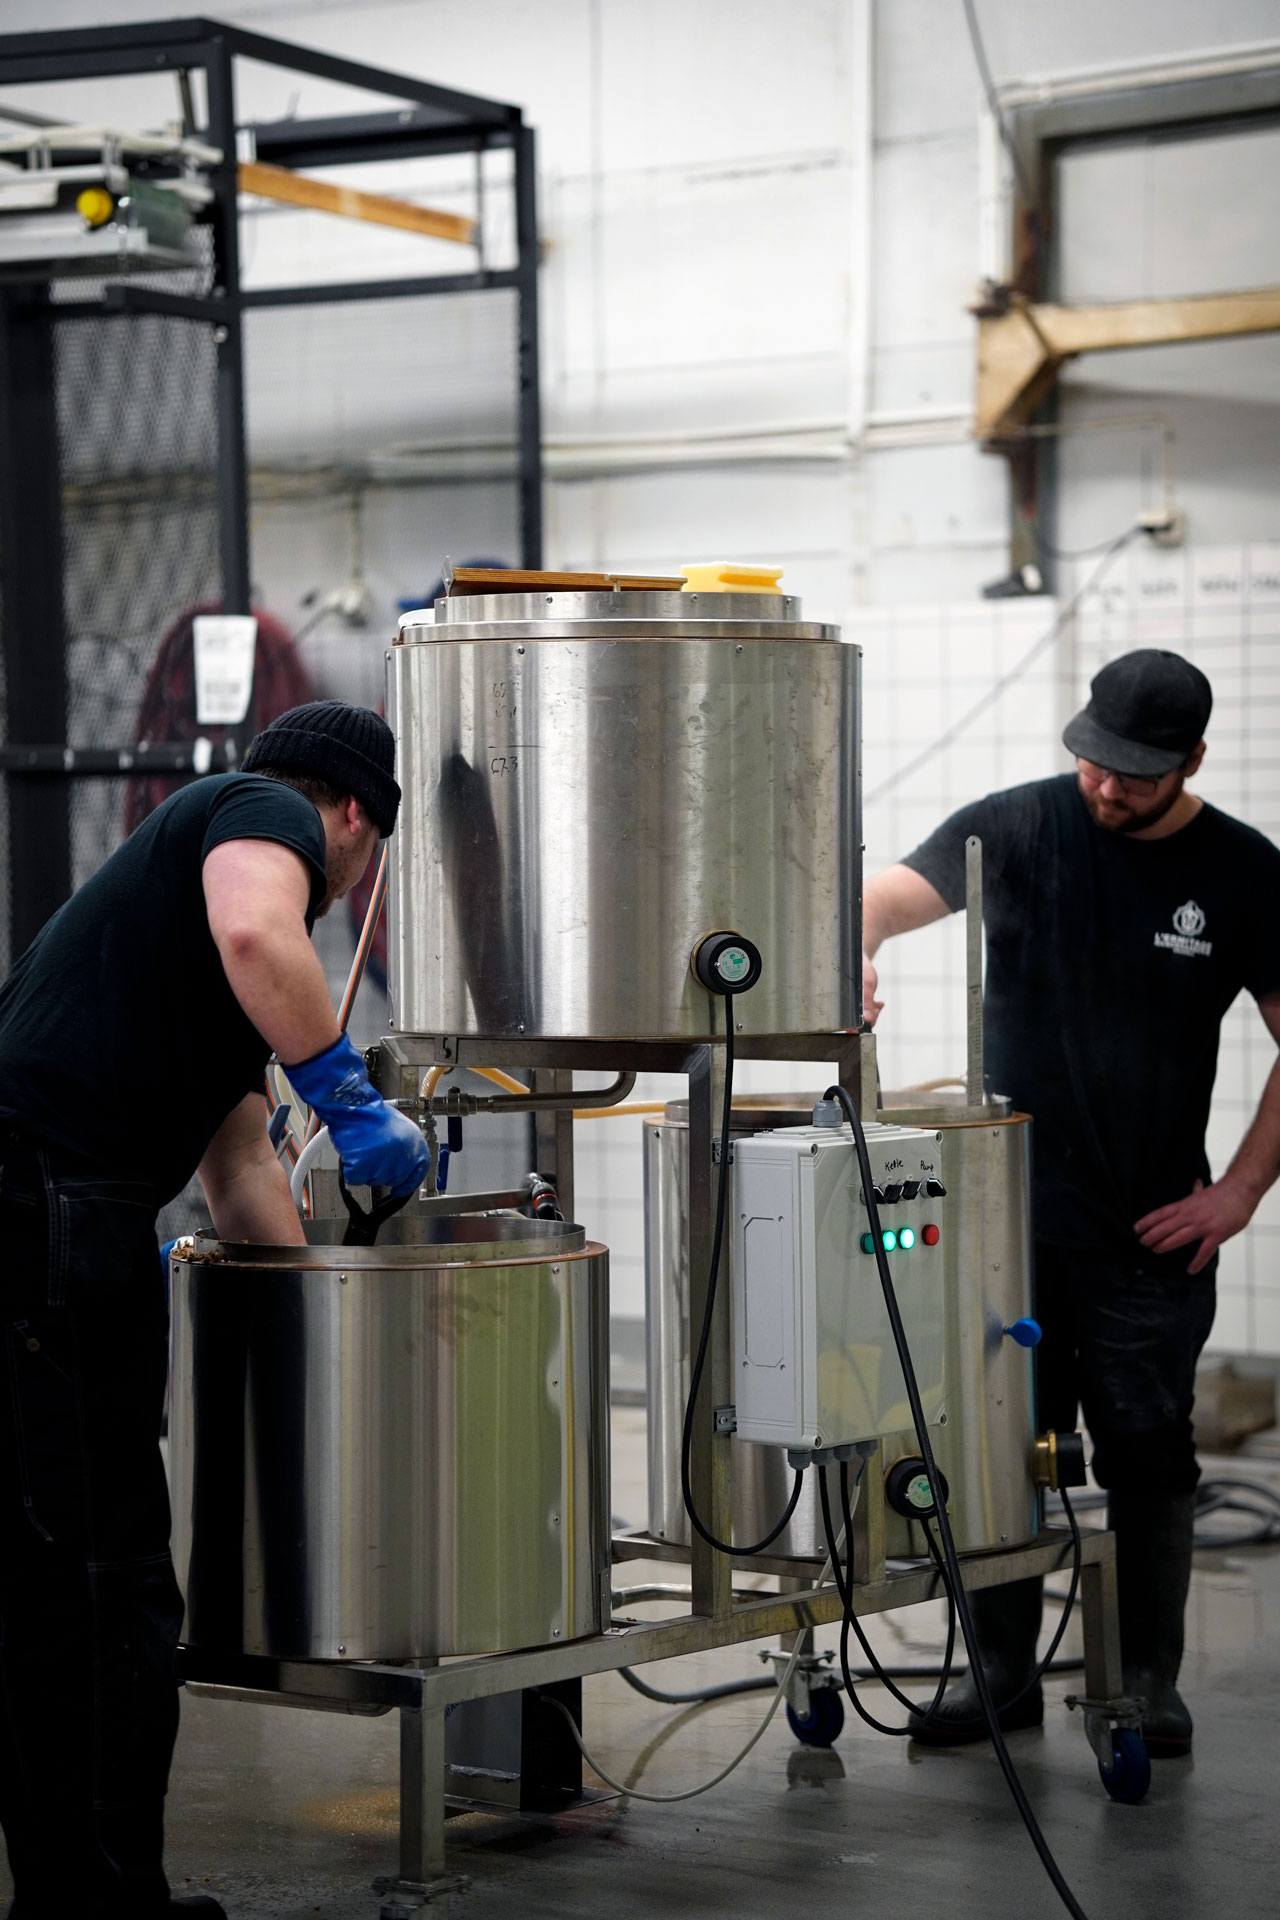 Jimmy helping brew a cask Red Ale, created by one of our brewery interns, Christoffer. A one-time, limited experimental brew by Beerbliotek, a Swedish Craft Brewery Gothenburg, Sweden.